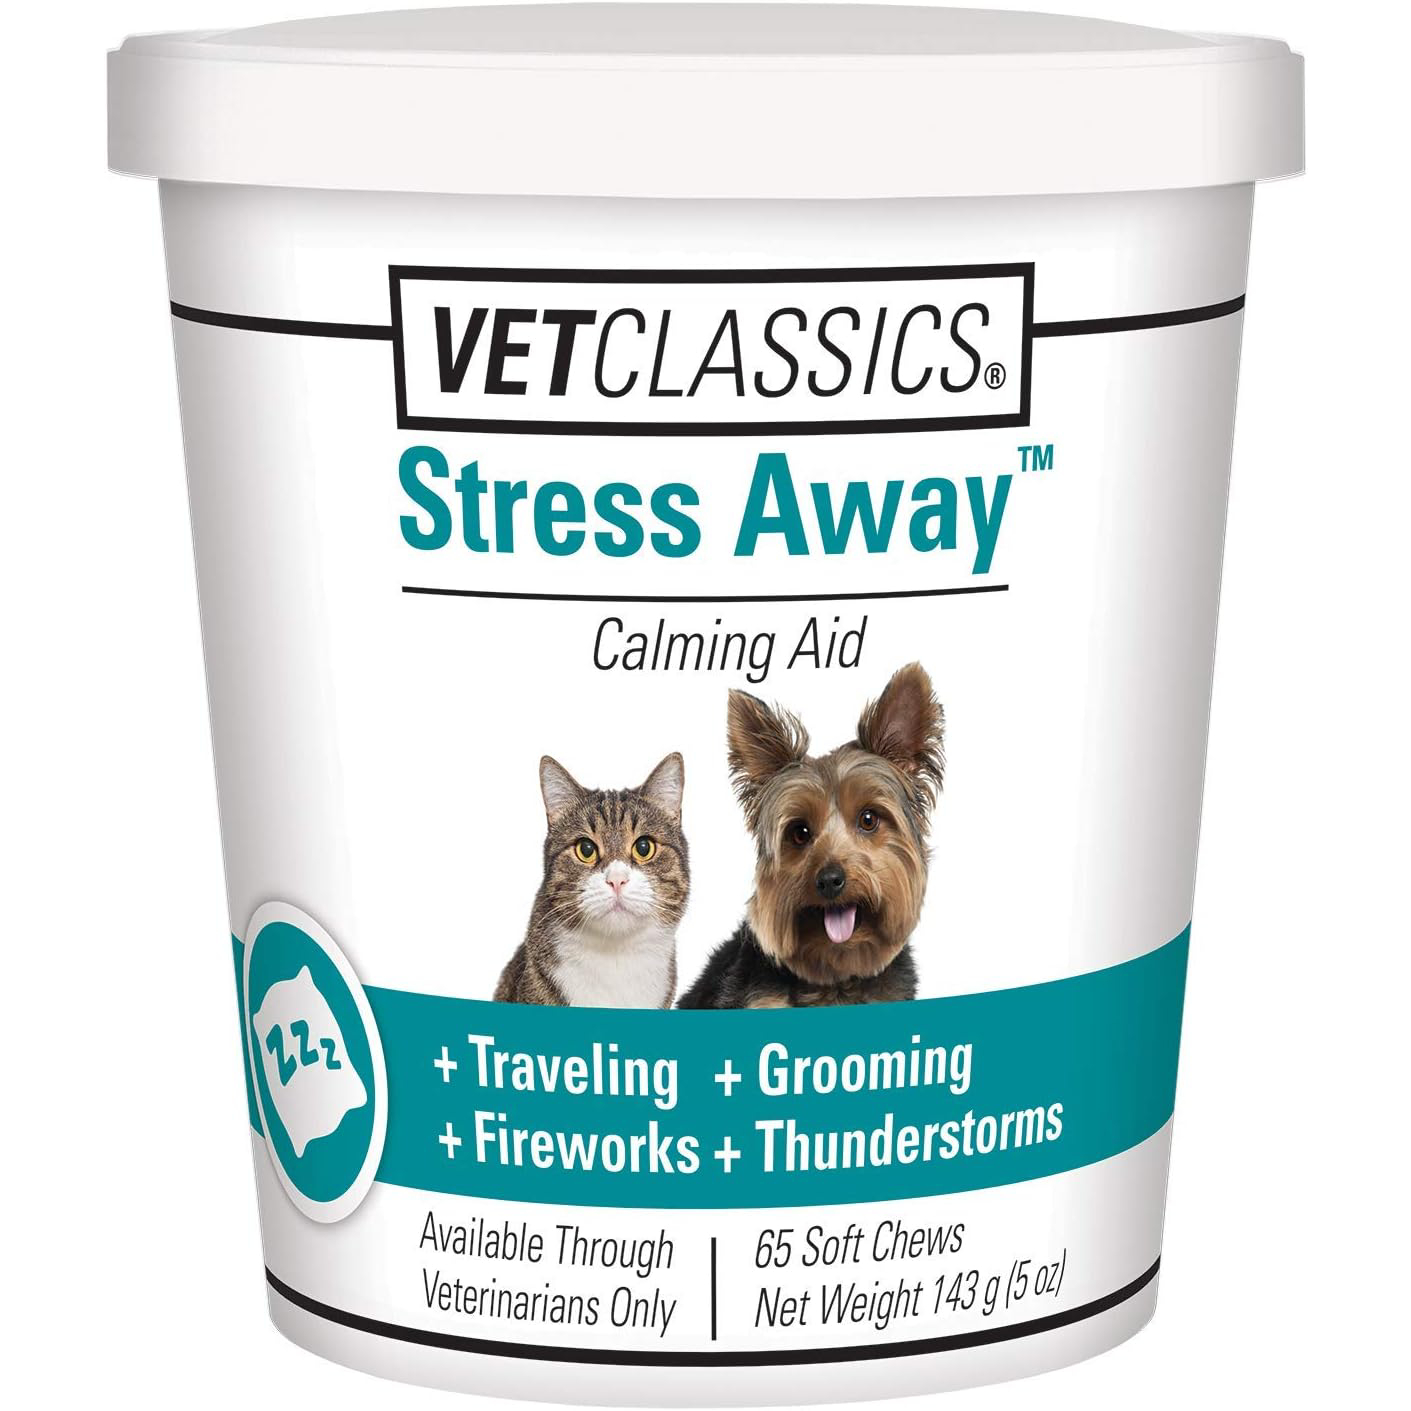 Vet Classics Stress Away Calming, Anxiety Aid for Dogs and Cats – Soft Chew Pet Health Supplement for Dogs, and Cats - Melatonin, Ginger – 65 Soft Chews New